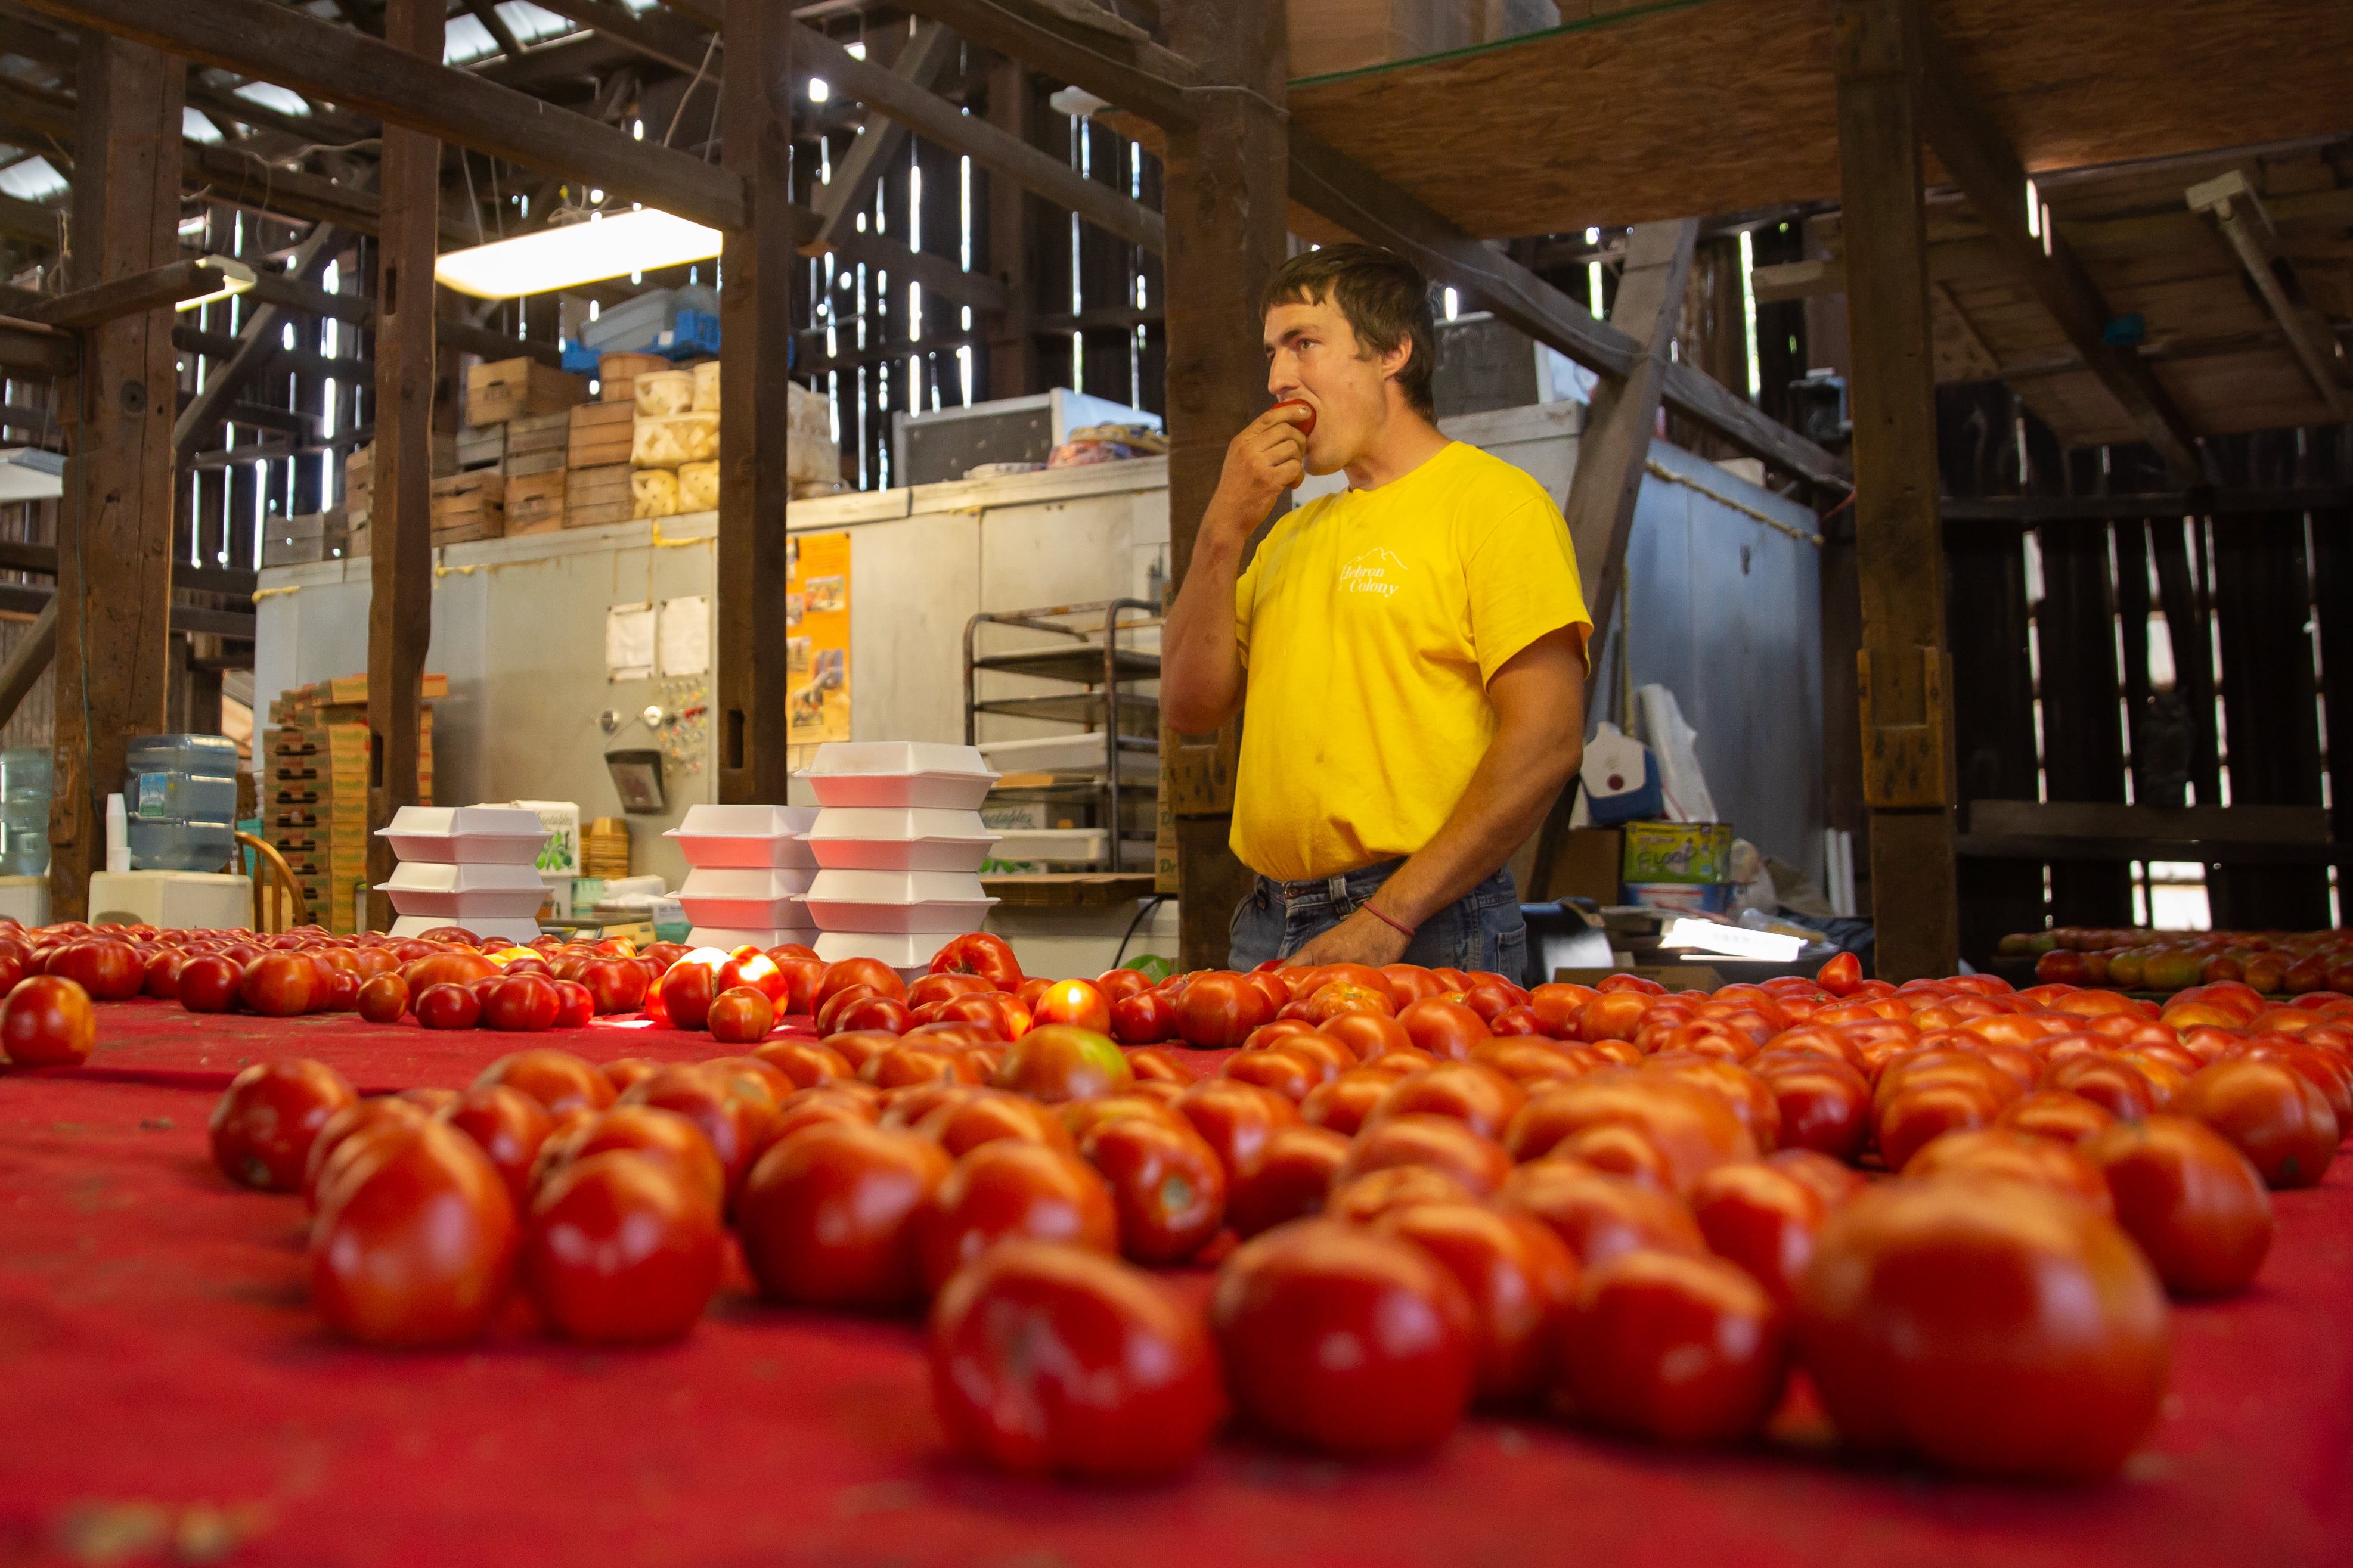 Tyler Rohrer, owner of the Tomato Barn in Washington Boro, Pennsylvania, lost some fields to flooding in 2018, but he said the impact continued into this year. “I’ve been told by grandparents and parents that they’ve never seen a year like it, so I take their word for it.” (Allie Barton/News21)